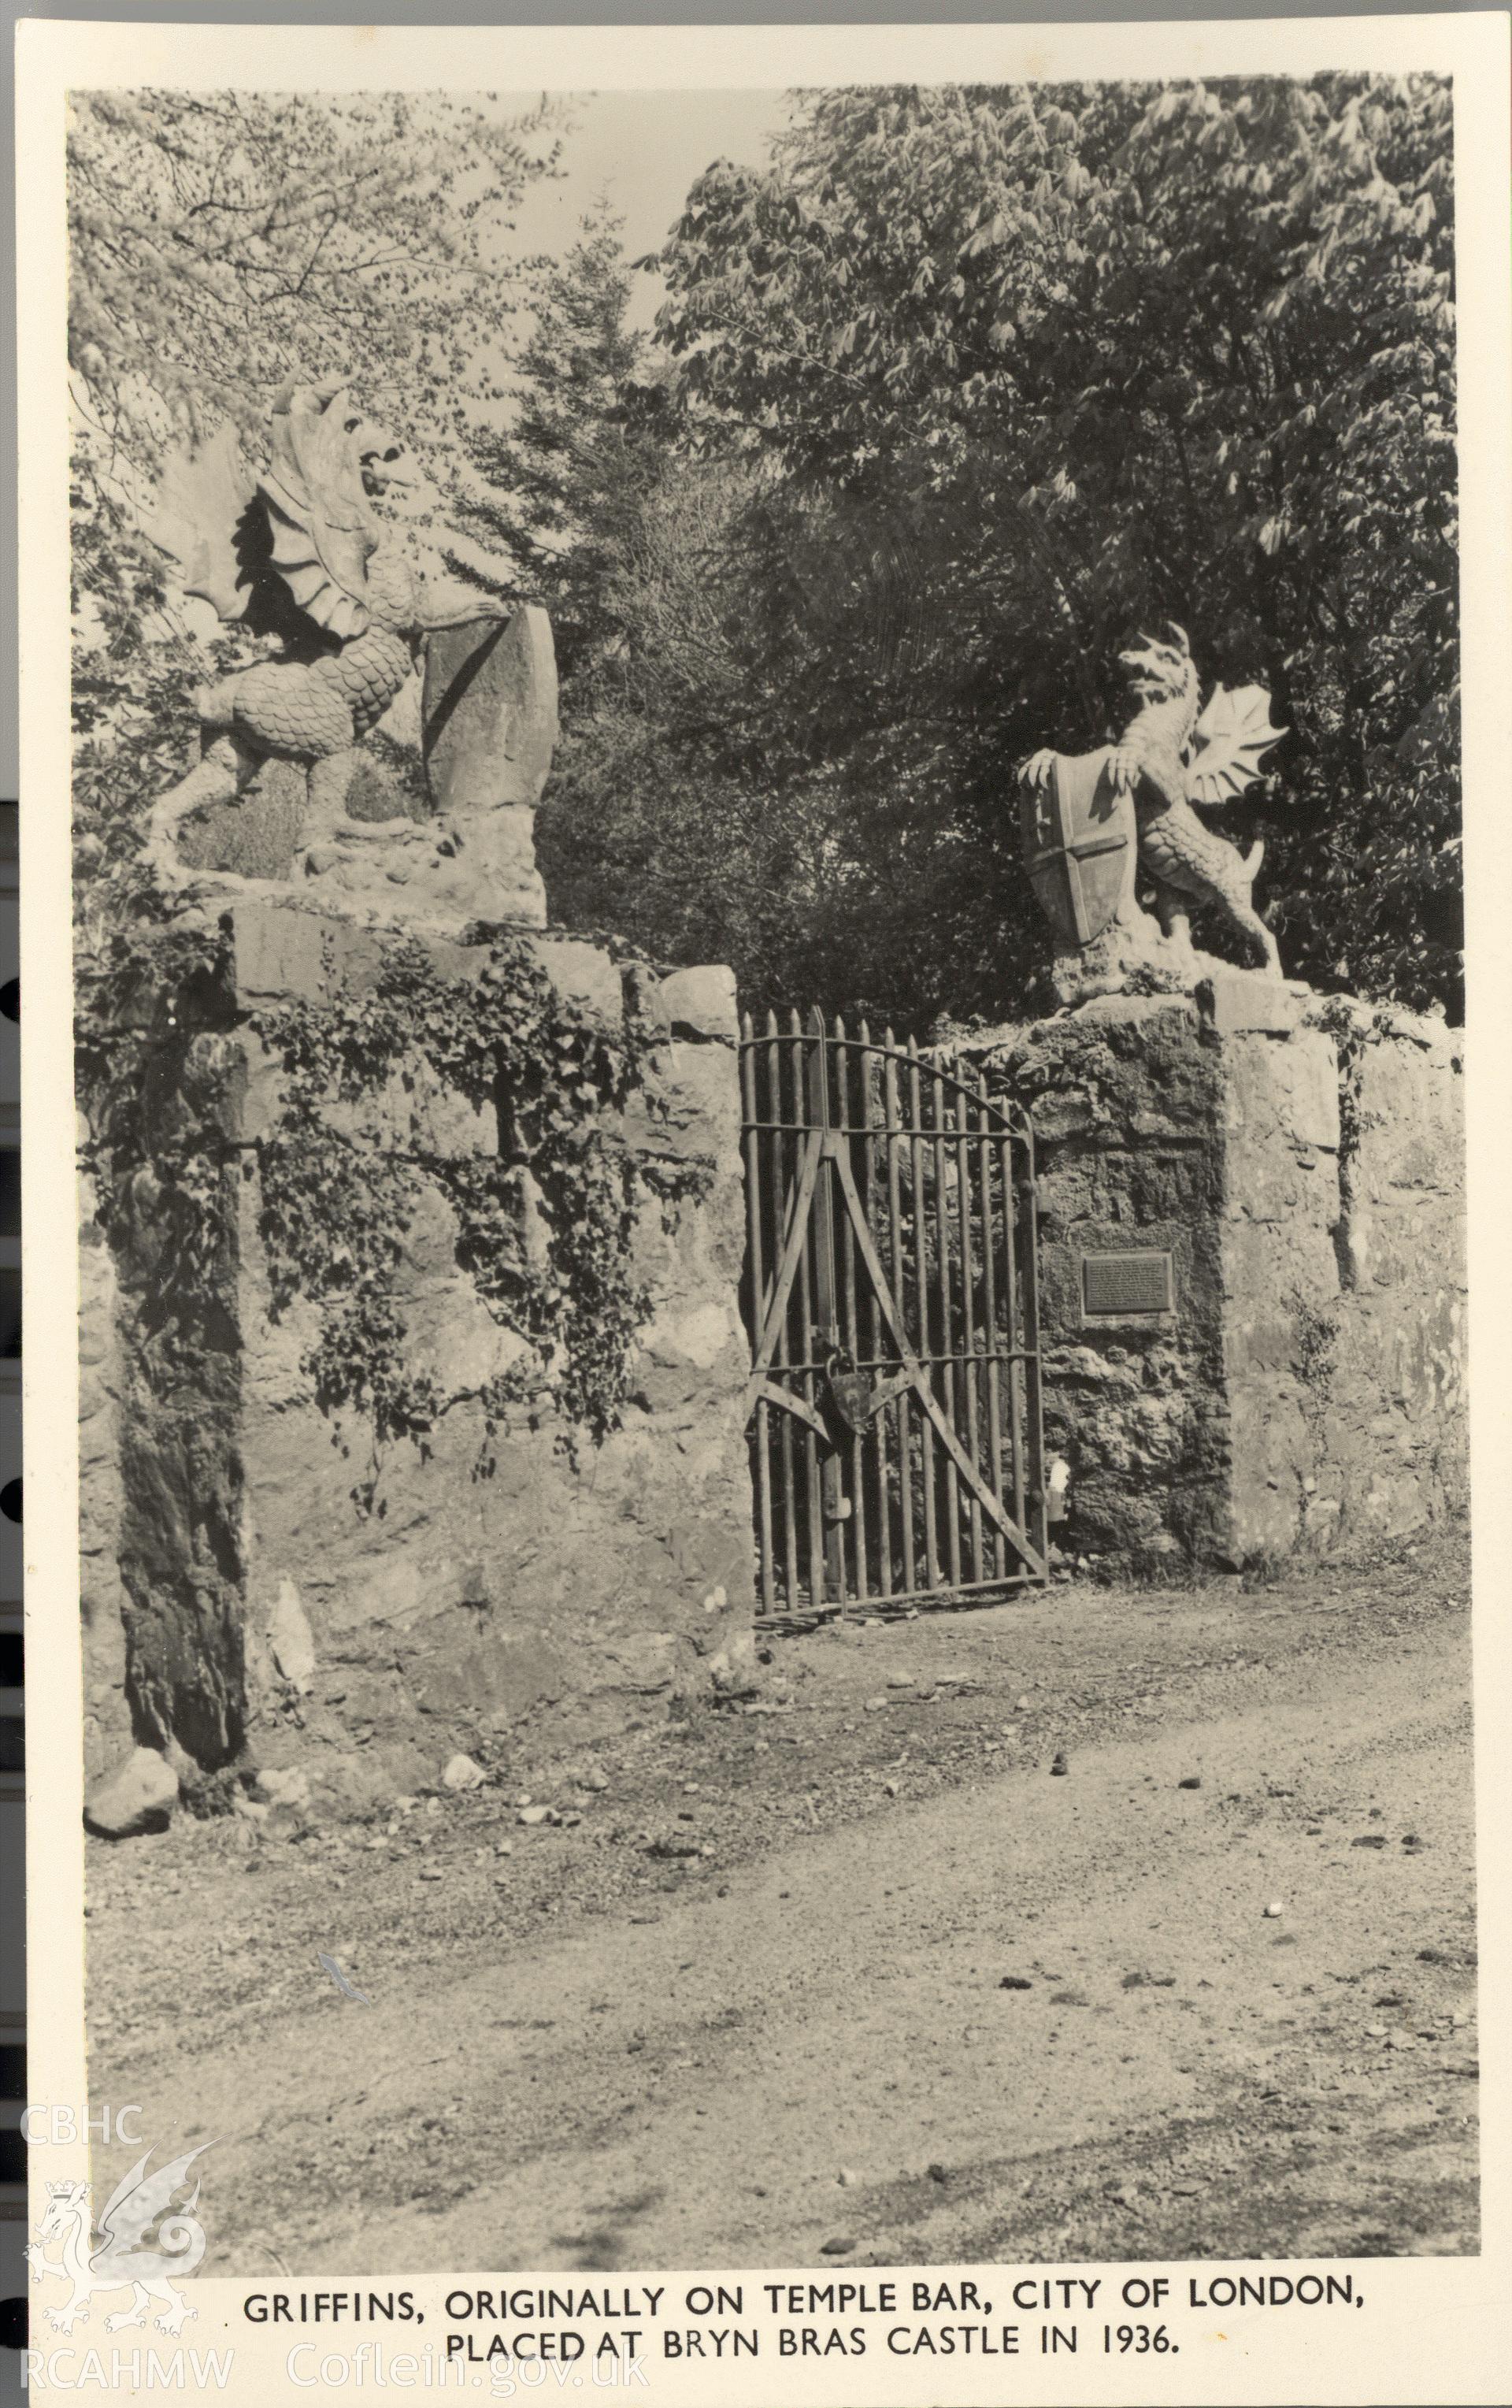 Digitised postcard image of Bryn Bras Castle entrance, Llanrug, with griffin gateposts. Produced by Parks and Gardens Data Services, from an original item in the Peter Davis Collection at Parks and Gardens UK. We hold only web-resolution images of this collection, suitable for viewing on screen and for research purposes only. We do not hold the original images, or publication quality scans.